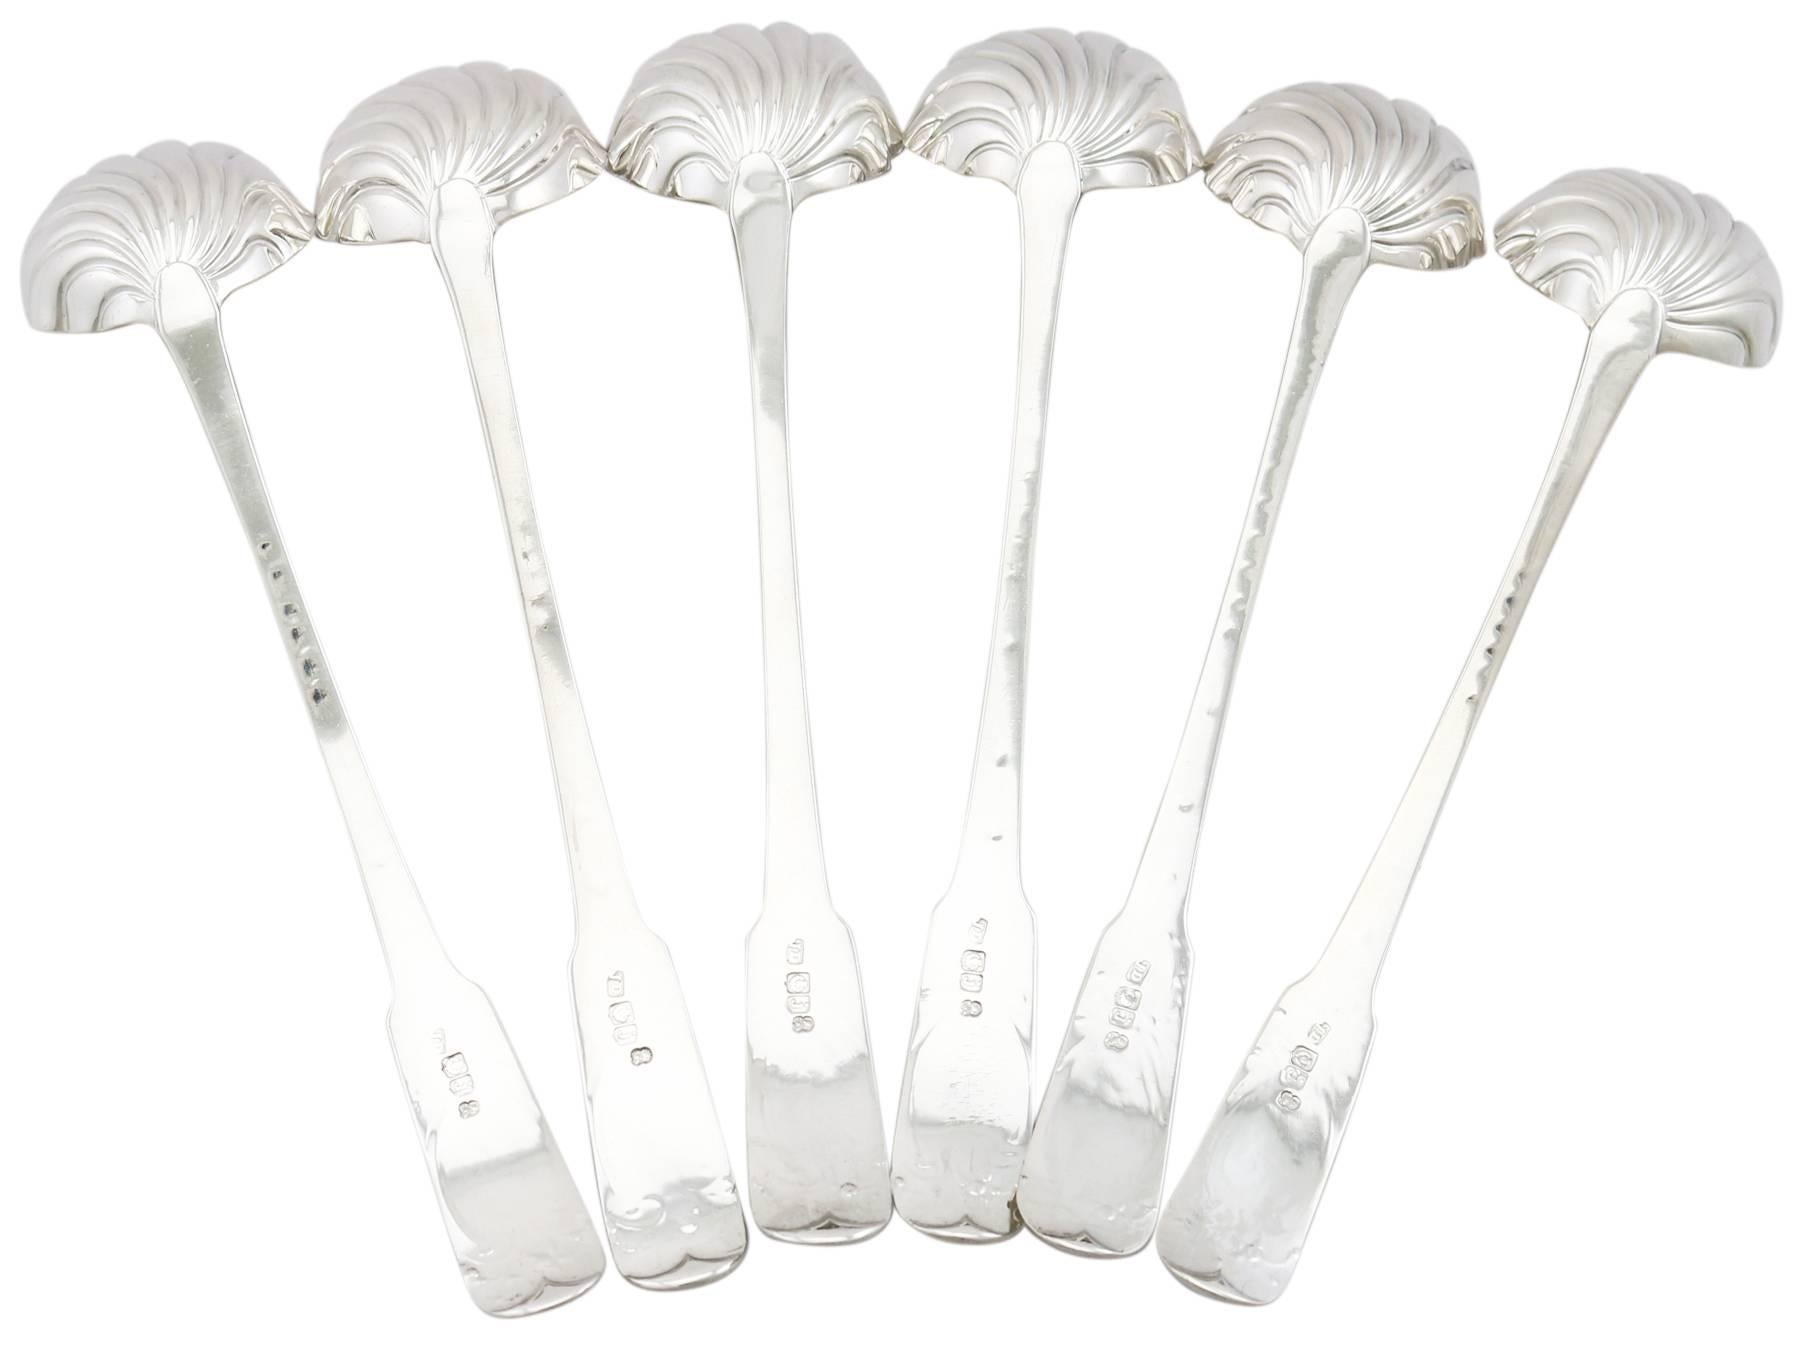 These exceptional George III Scottish sterling silver toddy ladles have been crafted in the Fiddle pattern with a shell shaped bowl.

The anterior surface of each handle is embellished with simplified engraved floral and scrolling leaf